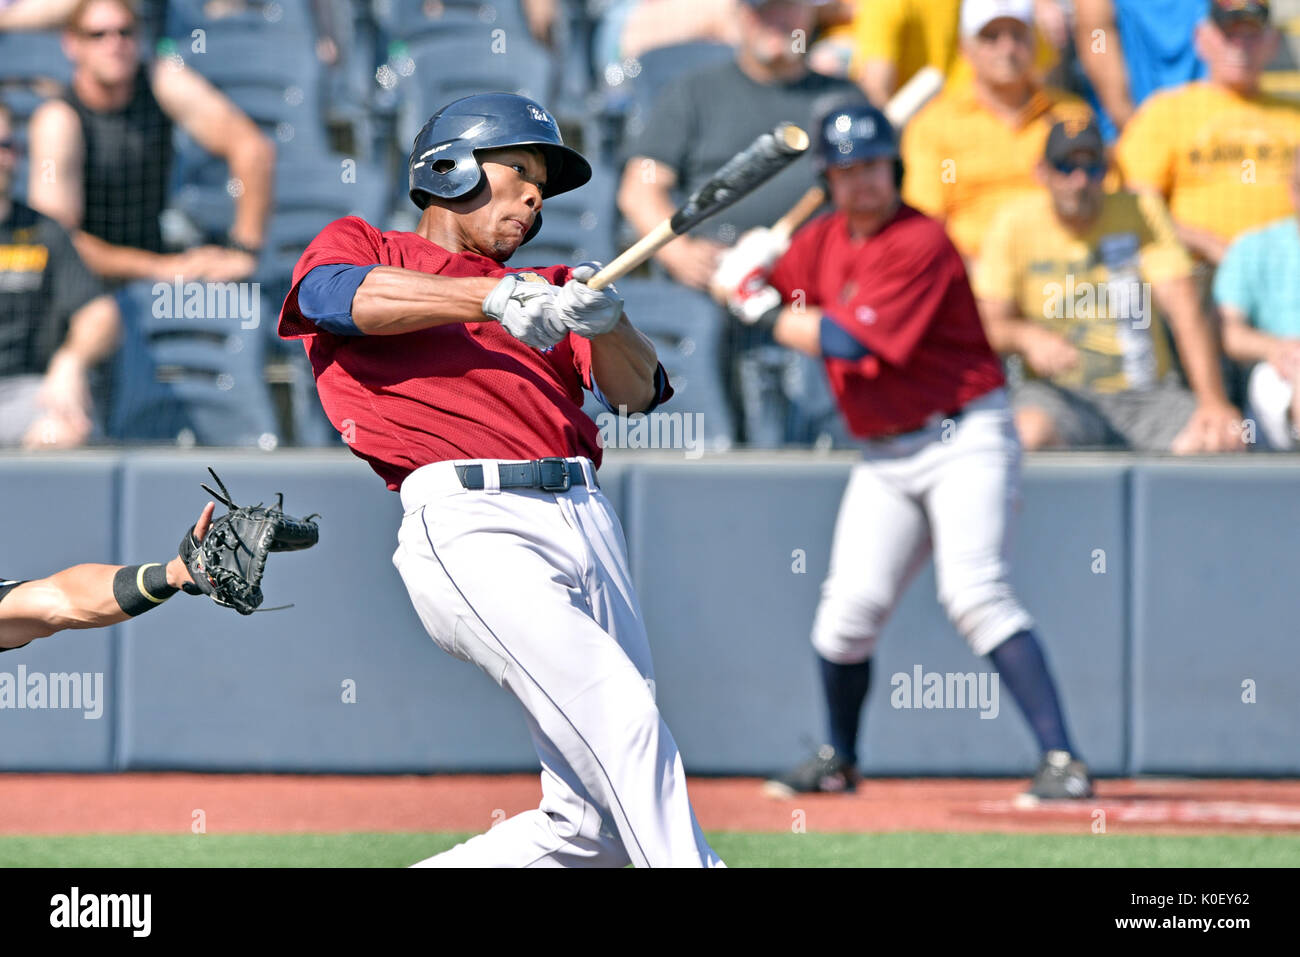 Morgantown, West Virginia, USA. 20th Aug, 2017. Mahoning Valley Scrappers right fielder WILL BENSON (7) during the August 20, 2017 New York-Penn league game at Monongalia County Ballpark in Morgantown, WV. Credit: Ken Inness/ZUMA Wire/Alamy Live News Stock Photo